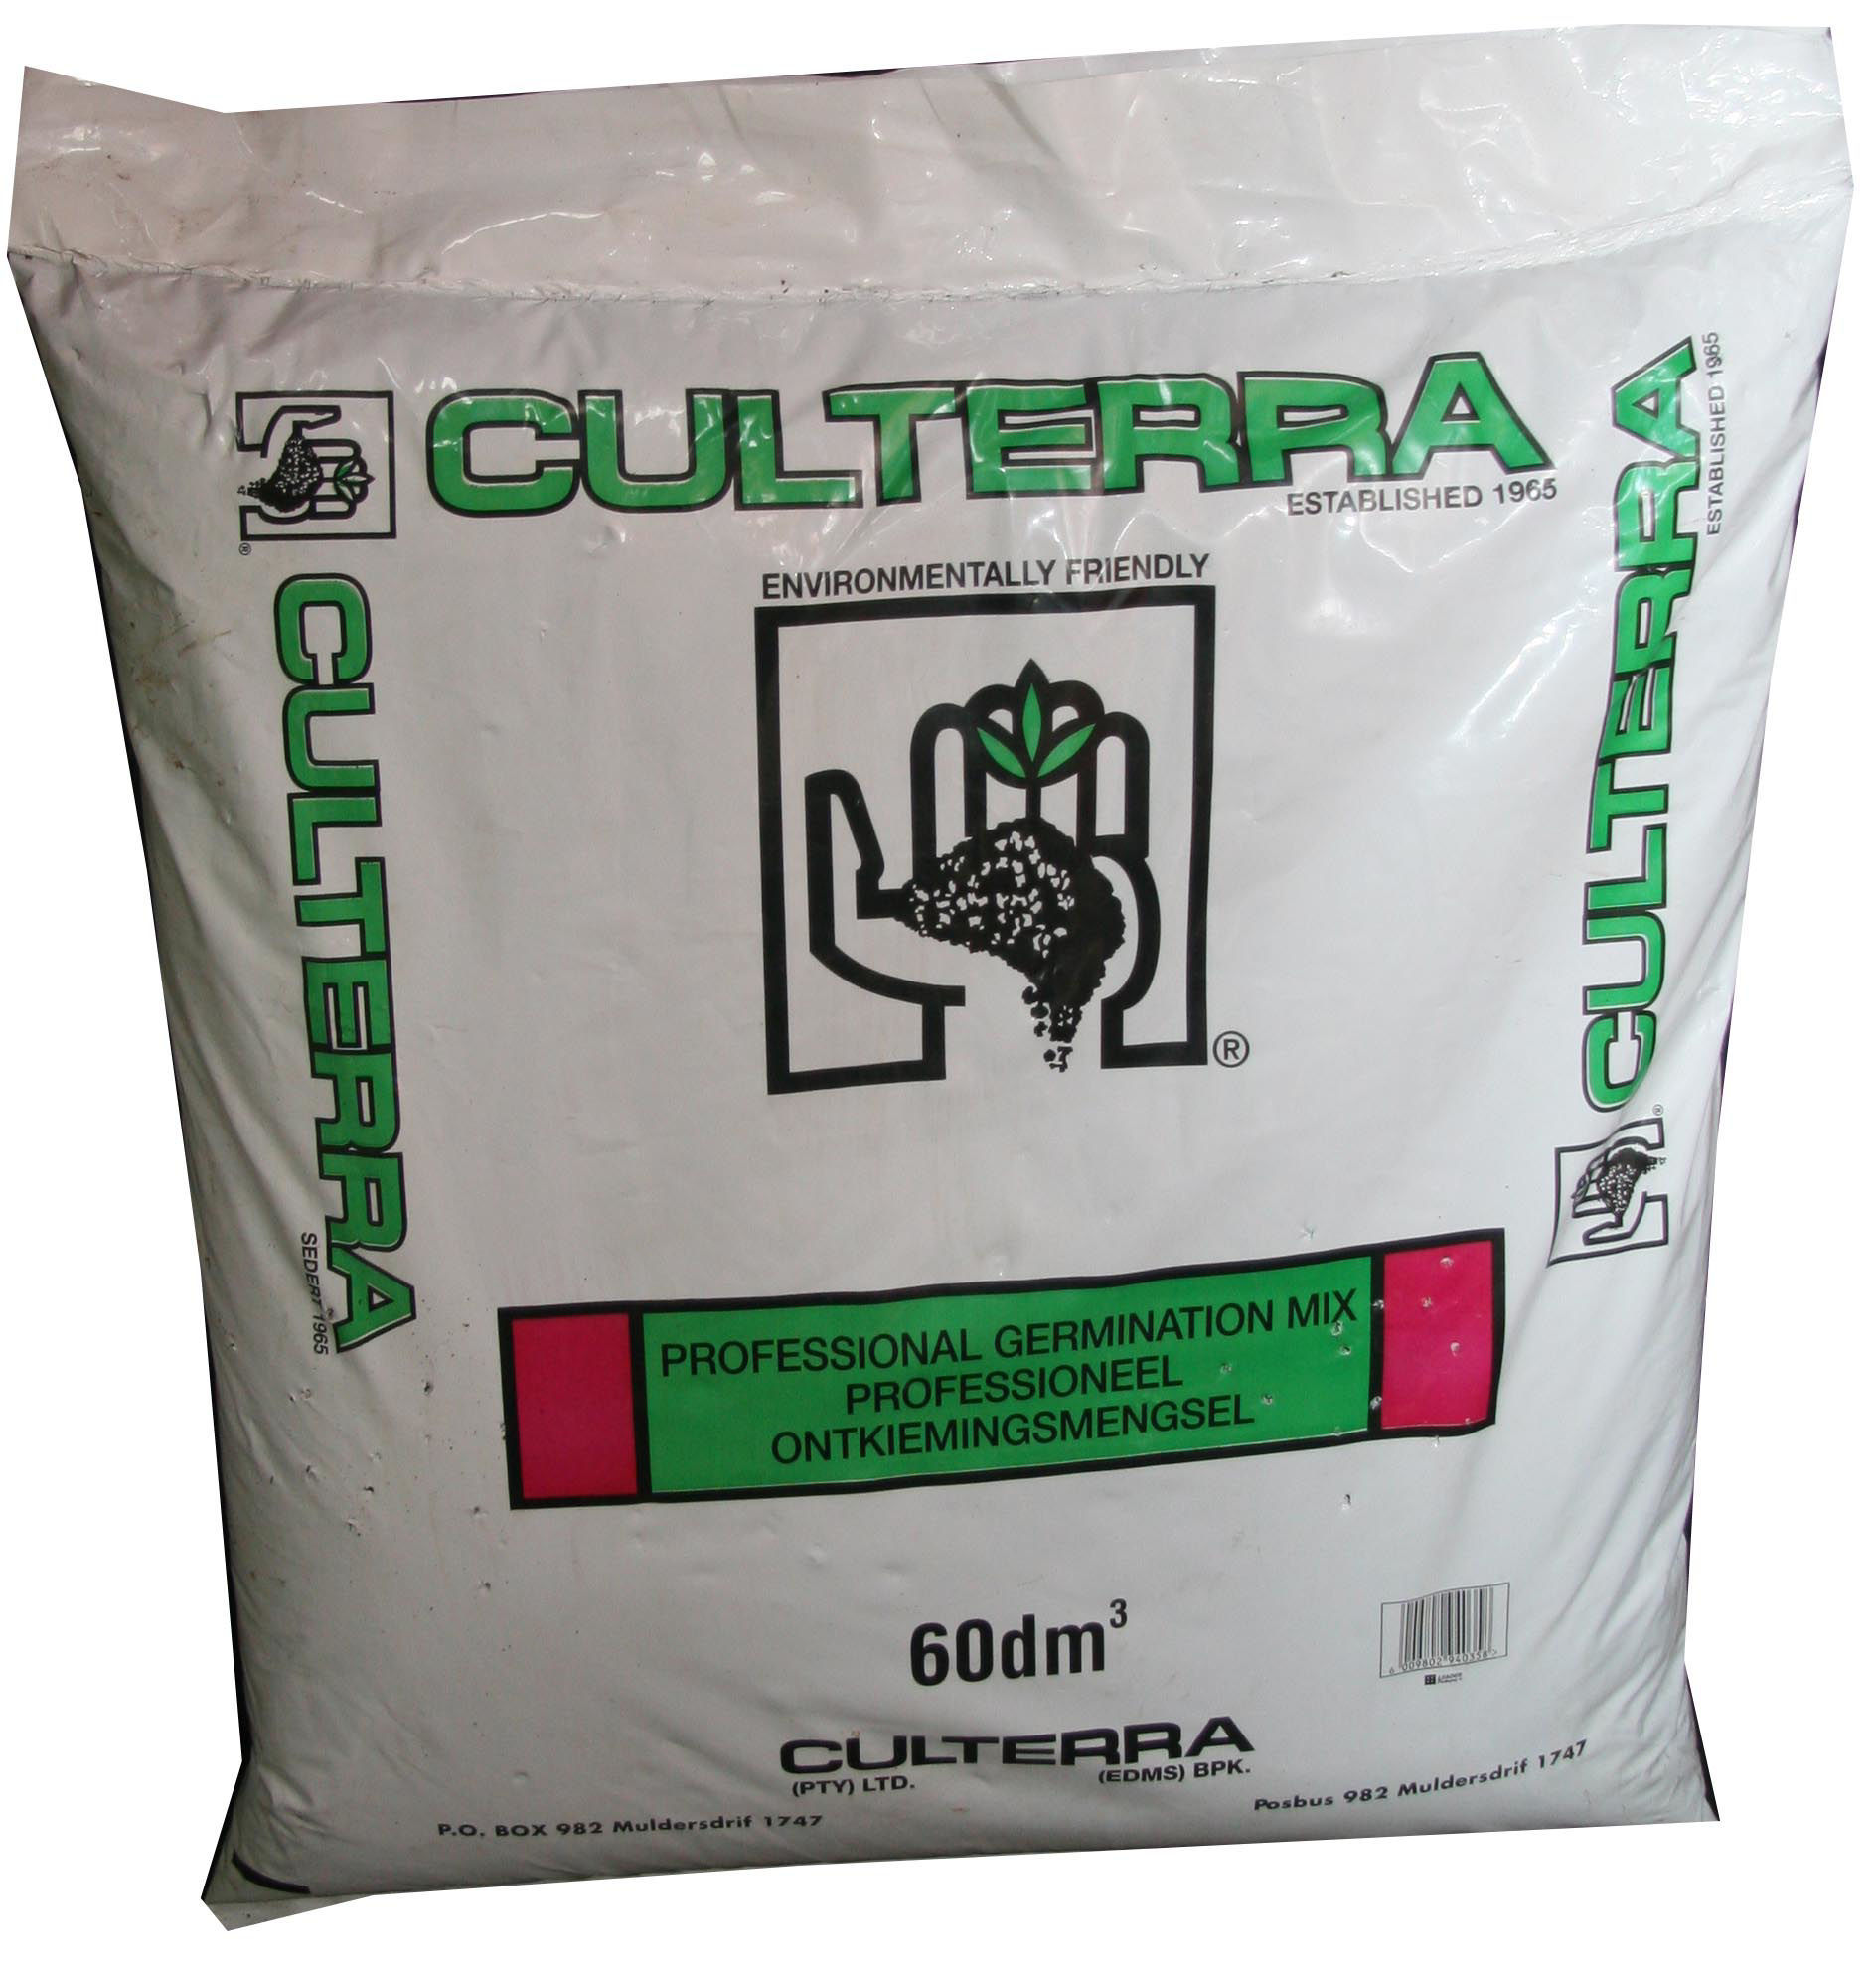 Picture of Culterra Germination Mix 60dmᵌ